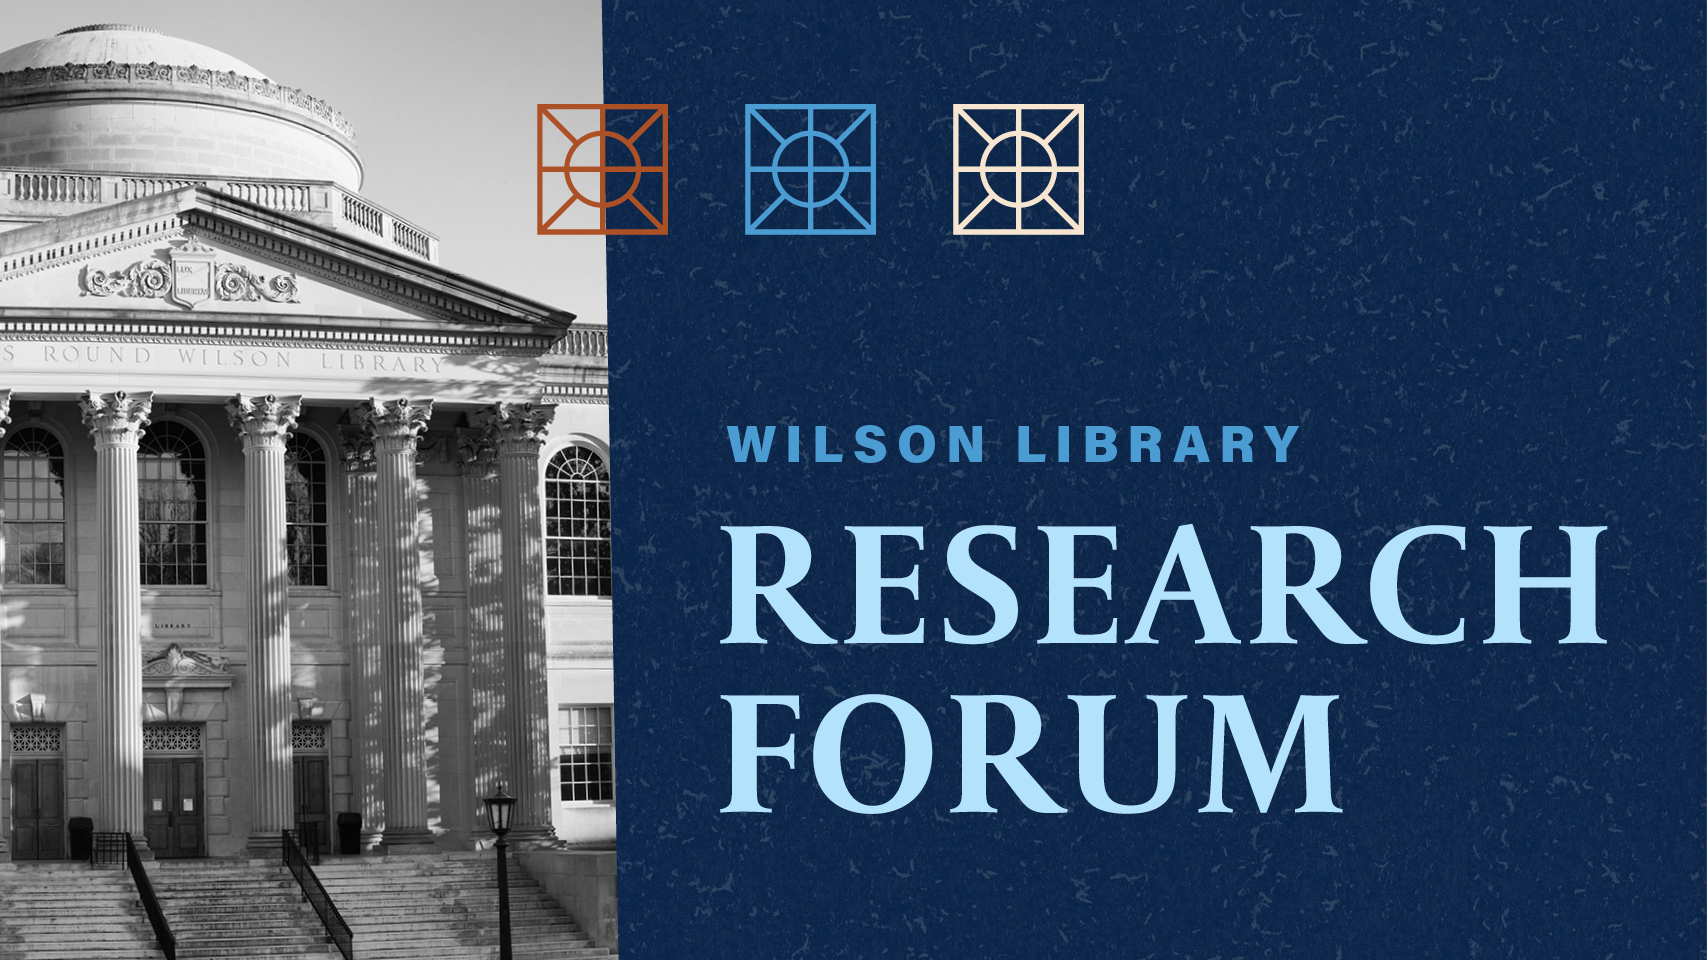 Wilson Library Research Forum in 2022